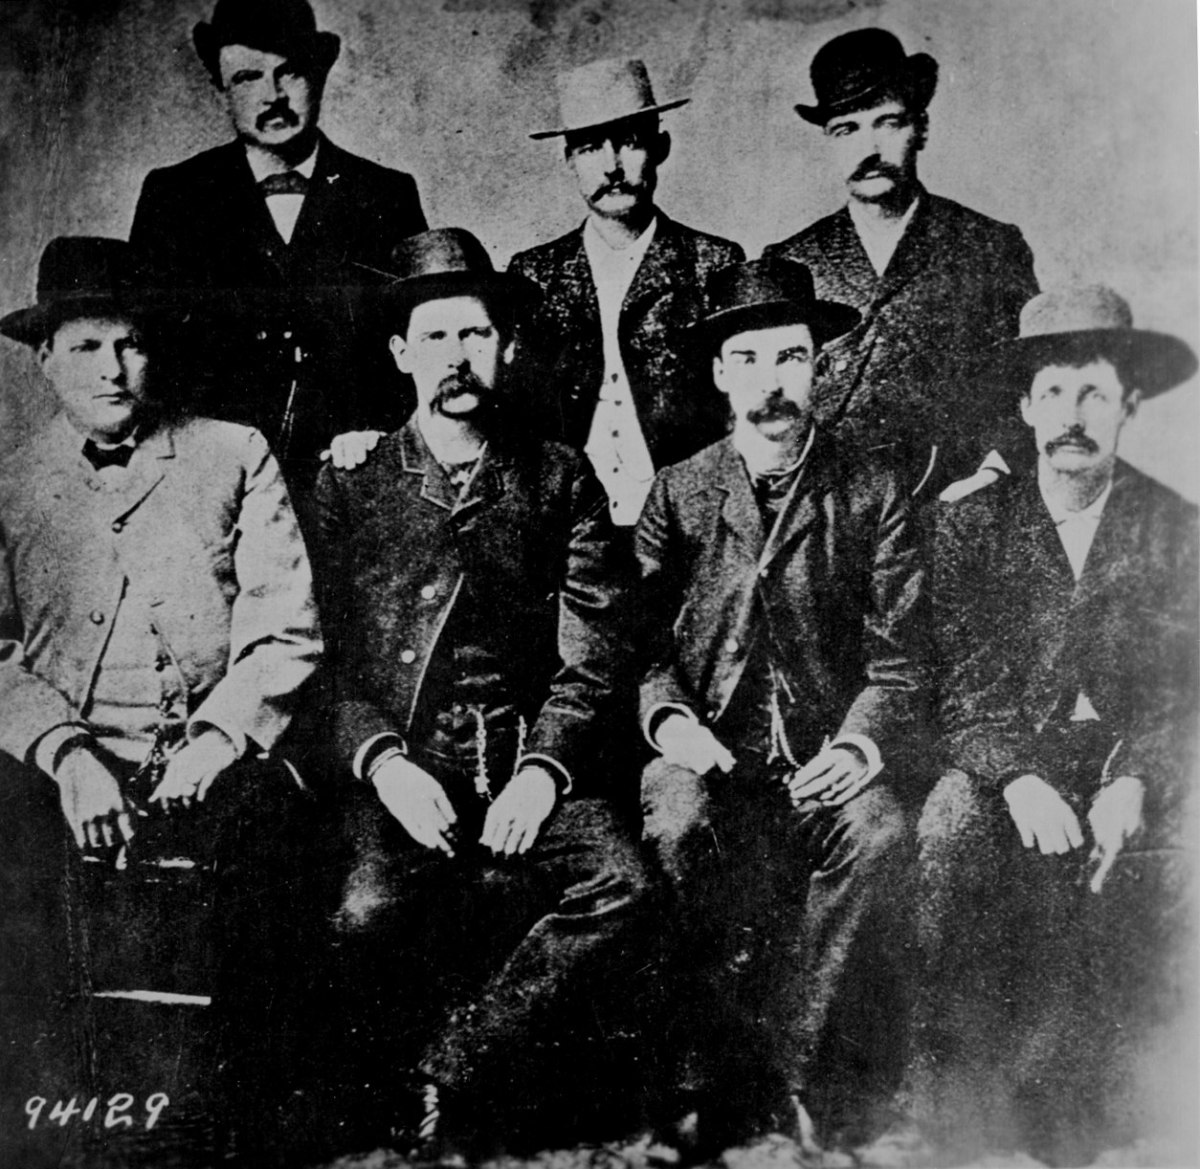 Wyatt Earp, a sheriff, was proclaimed the greatest gunfighter of all time.The "Dodge City Peace Commission" June 1883. From left to right: Standing: W.H. Harris, Luke Short, Bat Masterson; Seated: Charlie Bassett, Wyatt Earp, Frank McLain and Neal Br